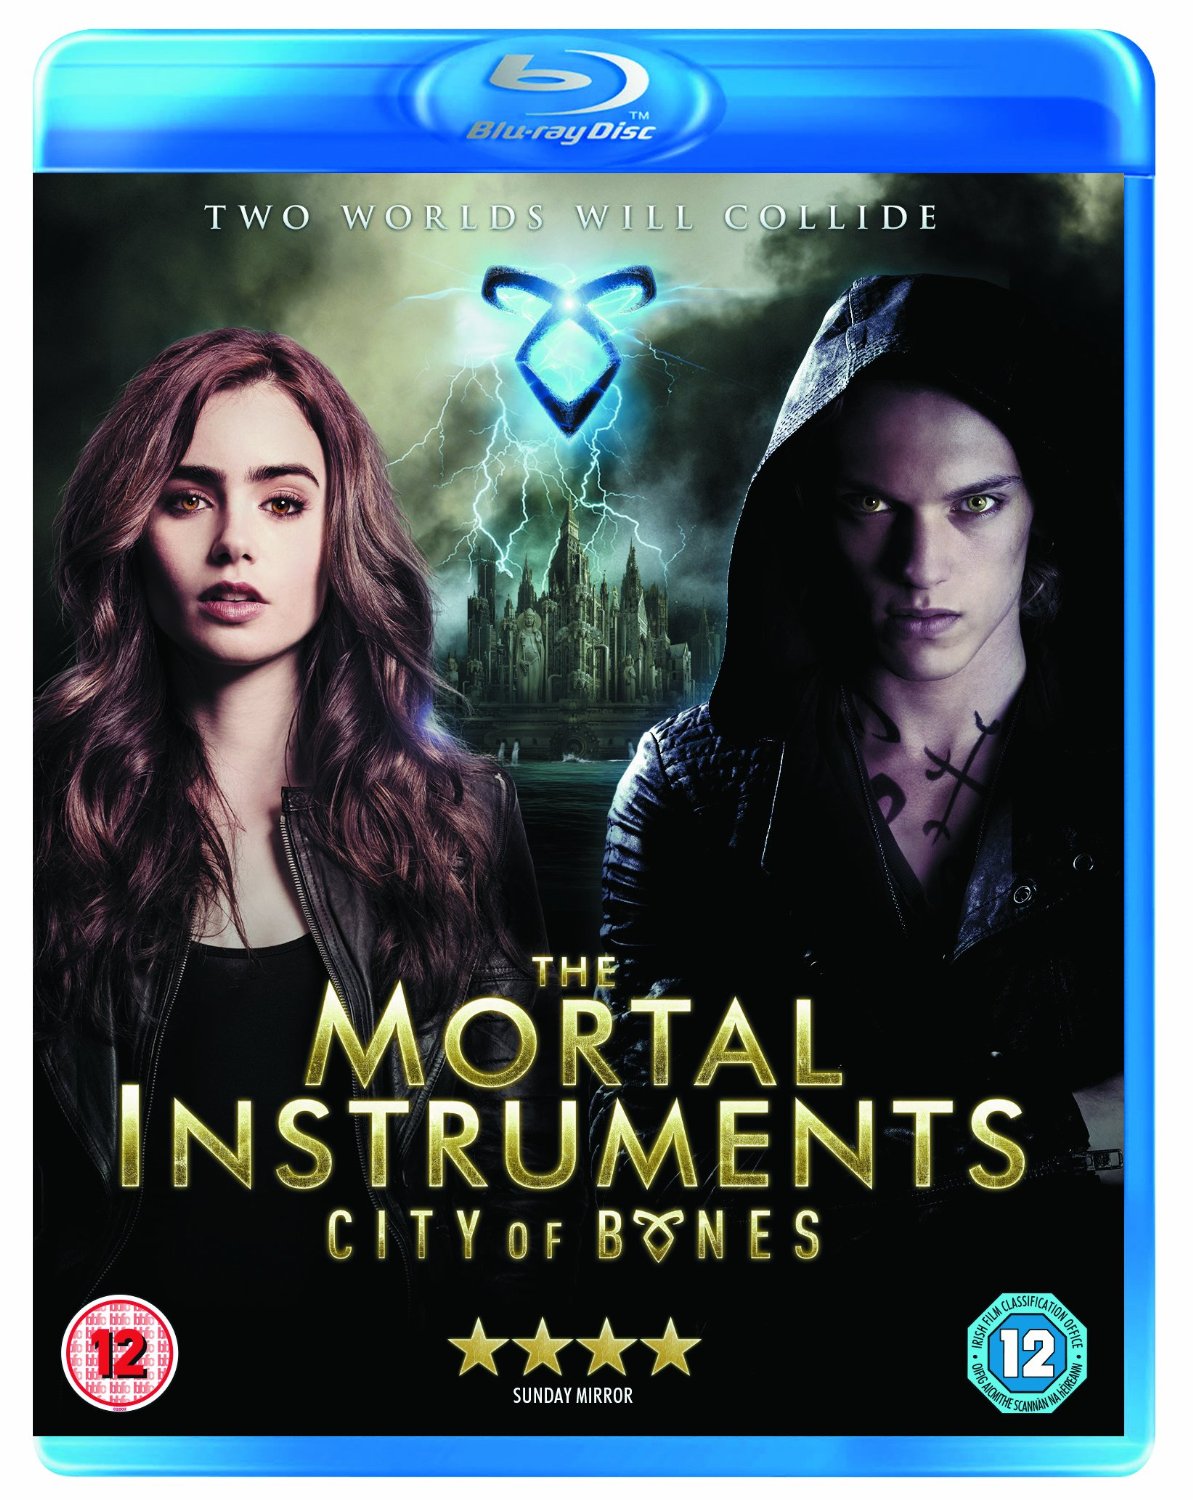 The Mortal Instruments: City of Bones (Vudu / Movies Anywhere) Code: DVD (SD) Quality